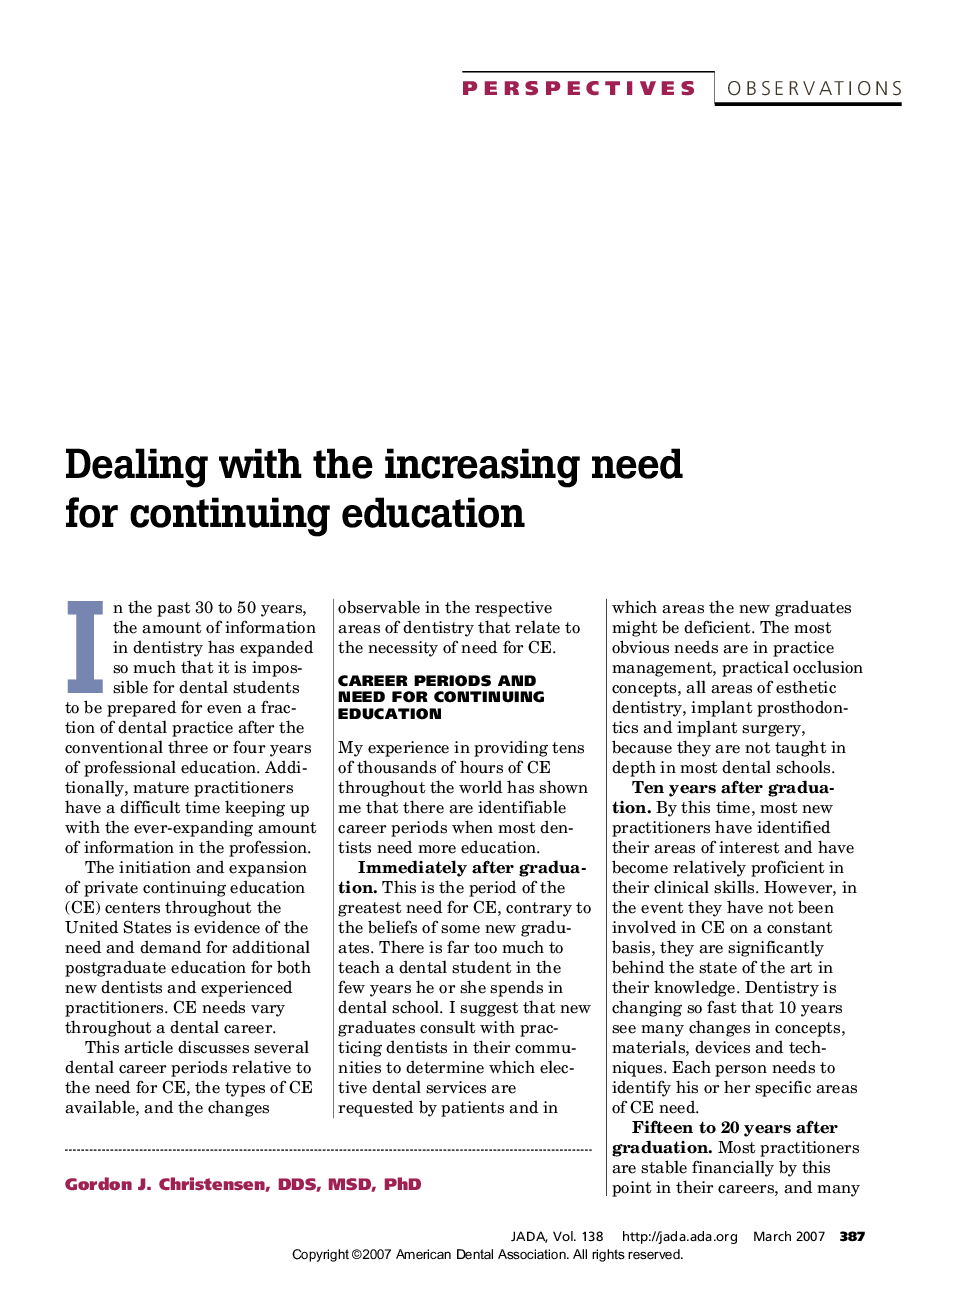 Dealing with the increasing need for continuing education